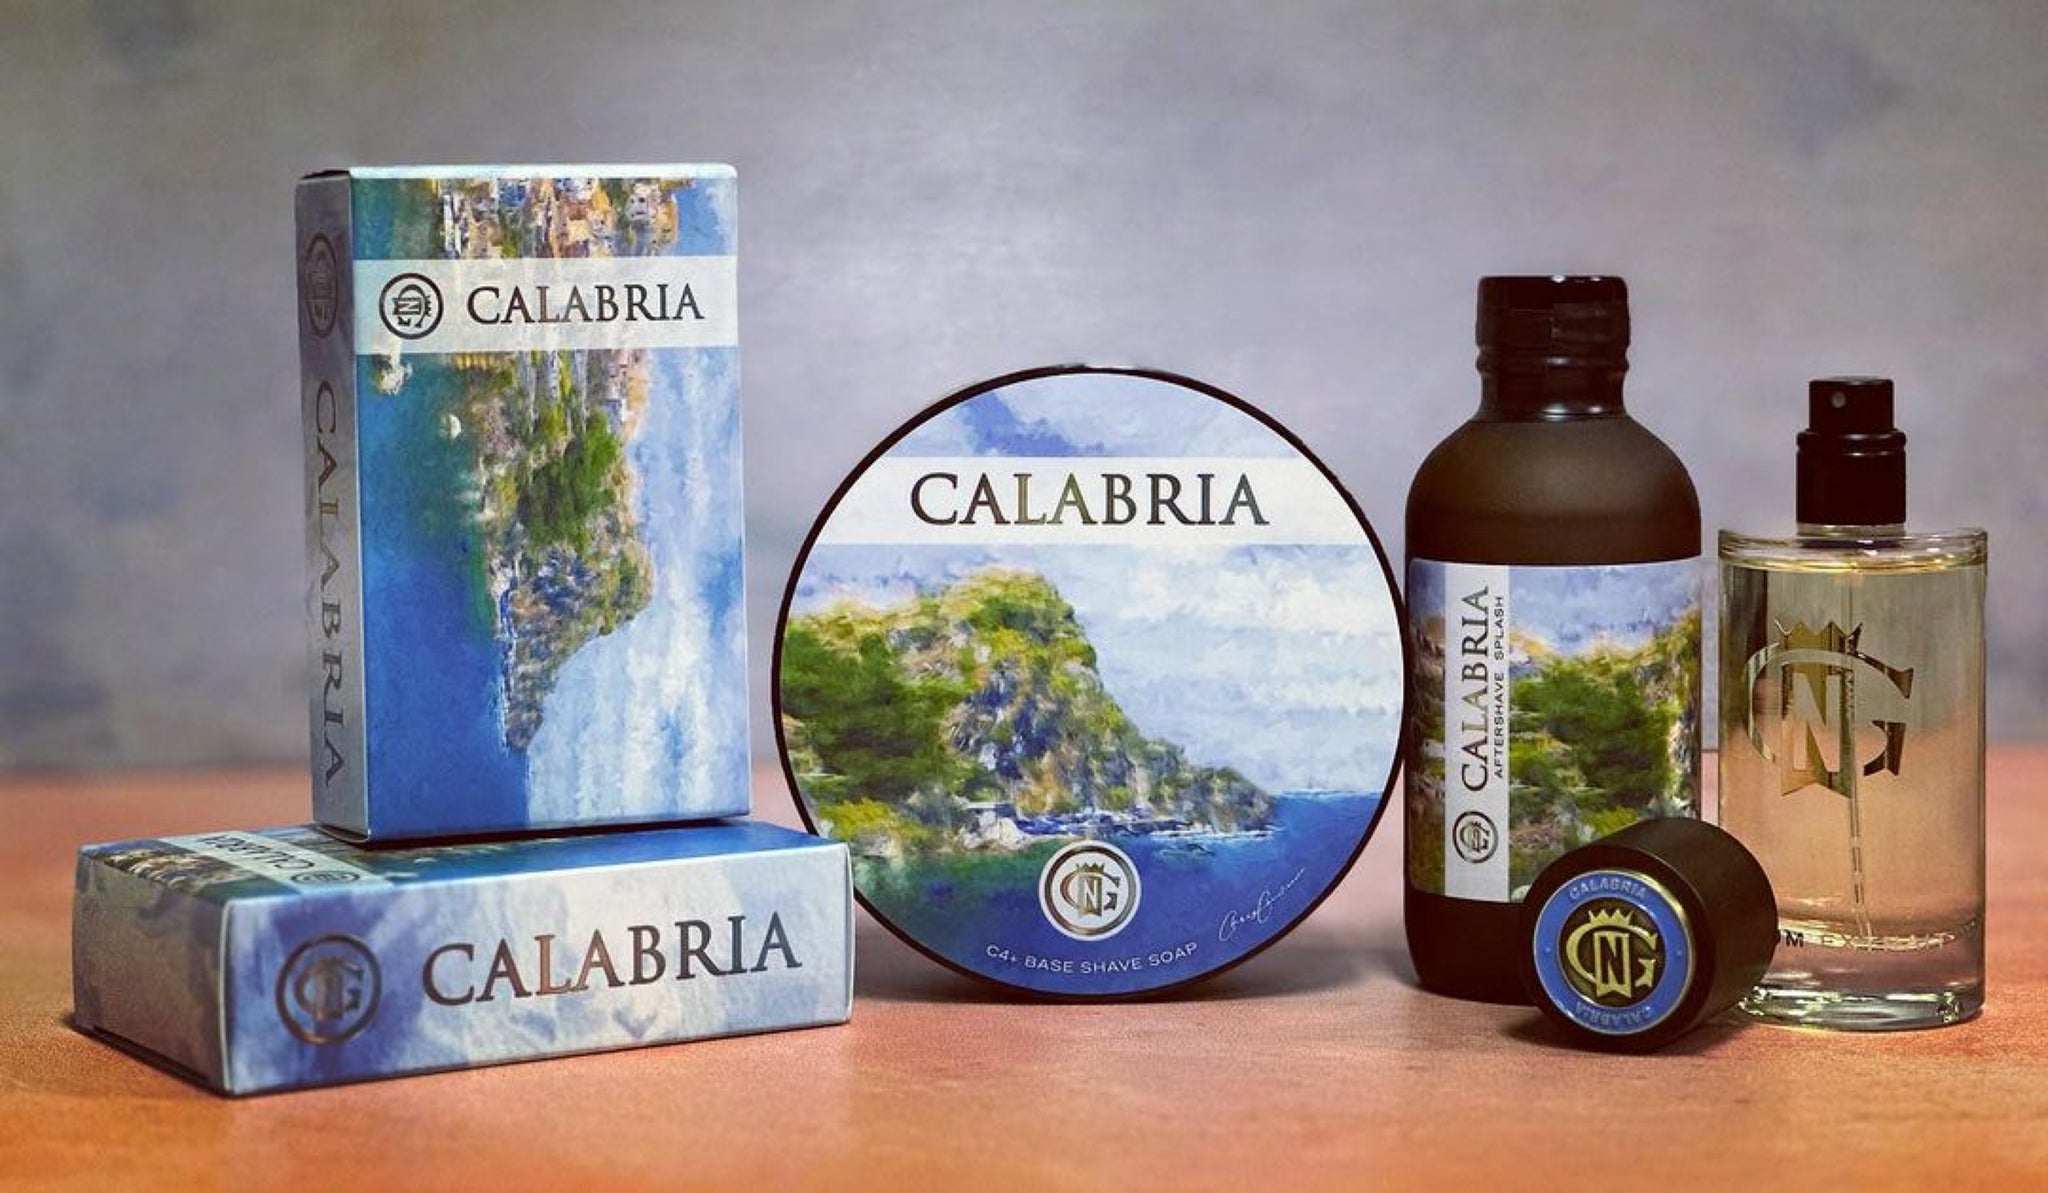 Calabria Parfum & Shave Gift Set (Trotter “Seaglass” #22 T1 Knot)